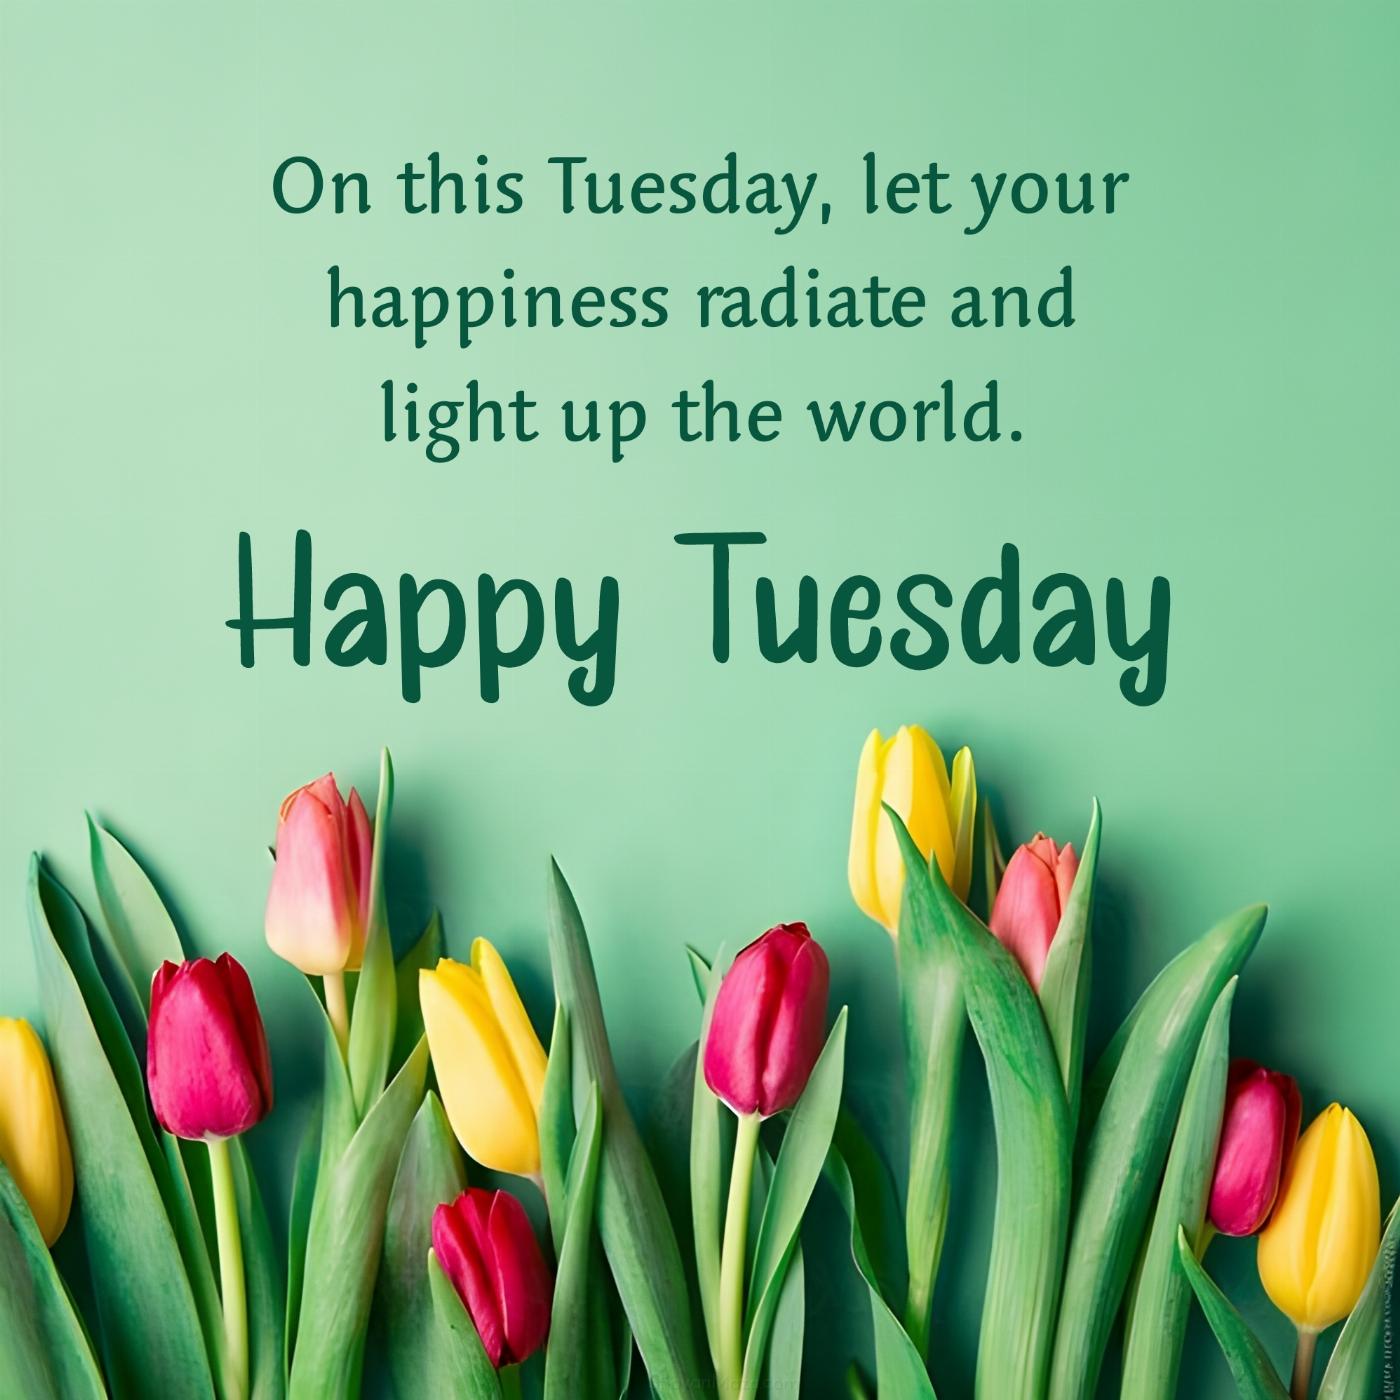 On this Tuesday let your happiness radiate